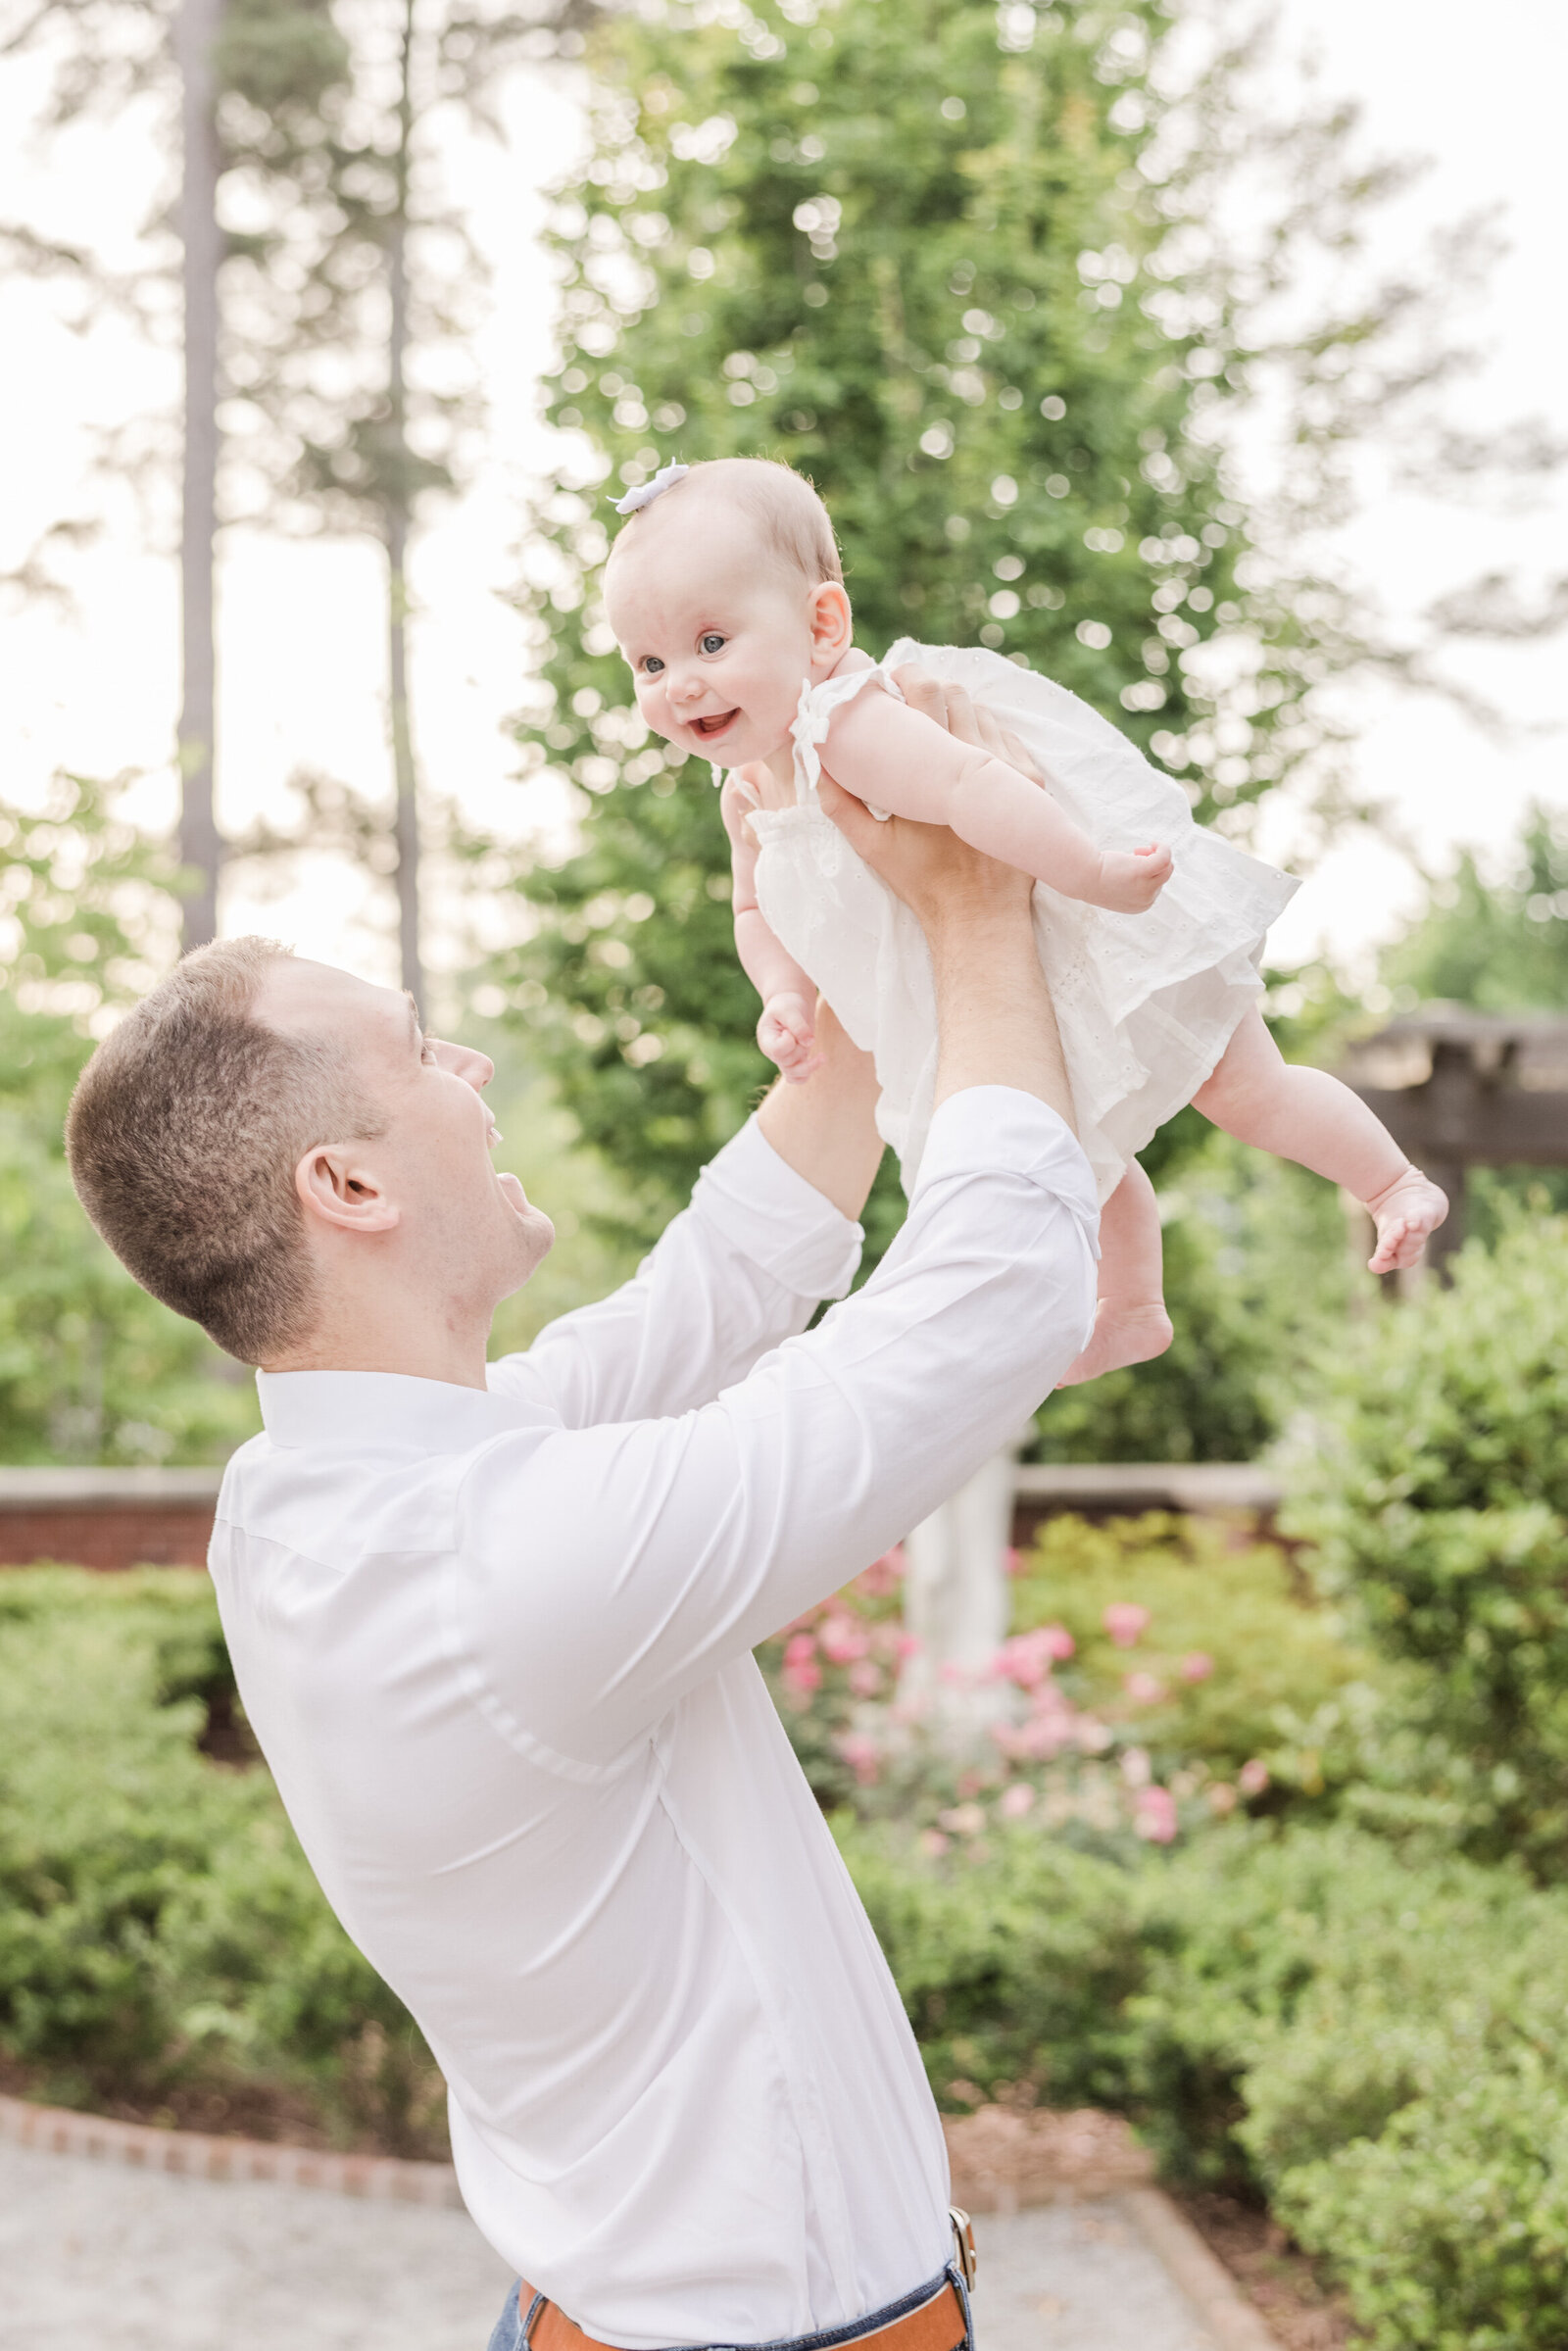 Father holding his smiling daughter up in the air.